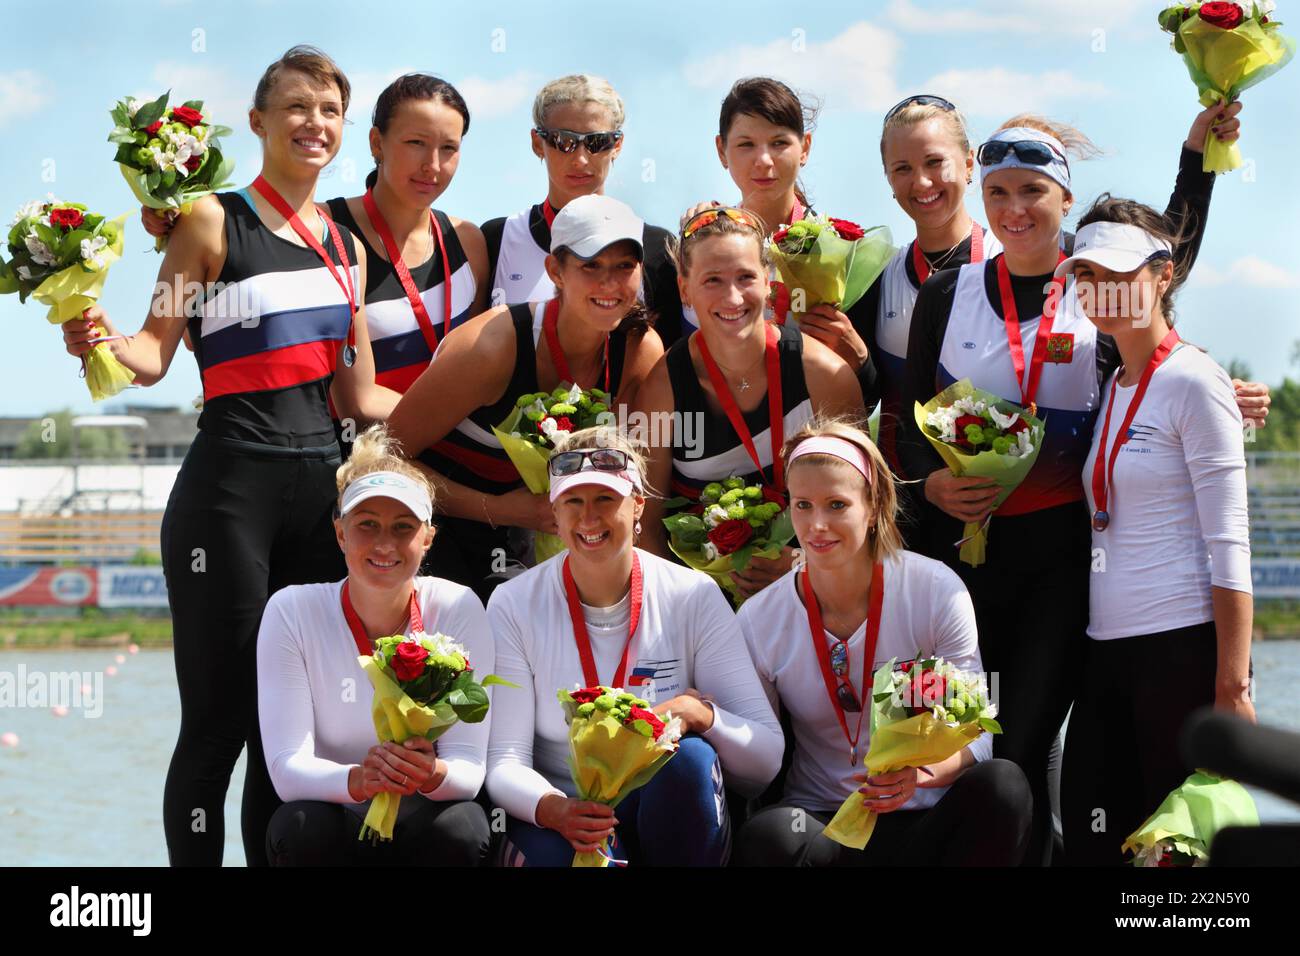 MOSCOW  - JUNE 5: Russian women team rowing at Great Moscow Regatta 2011 on June 5, 2011 in Moscow, Russia. Stock Photo